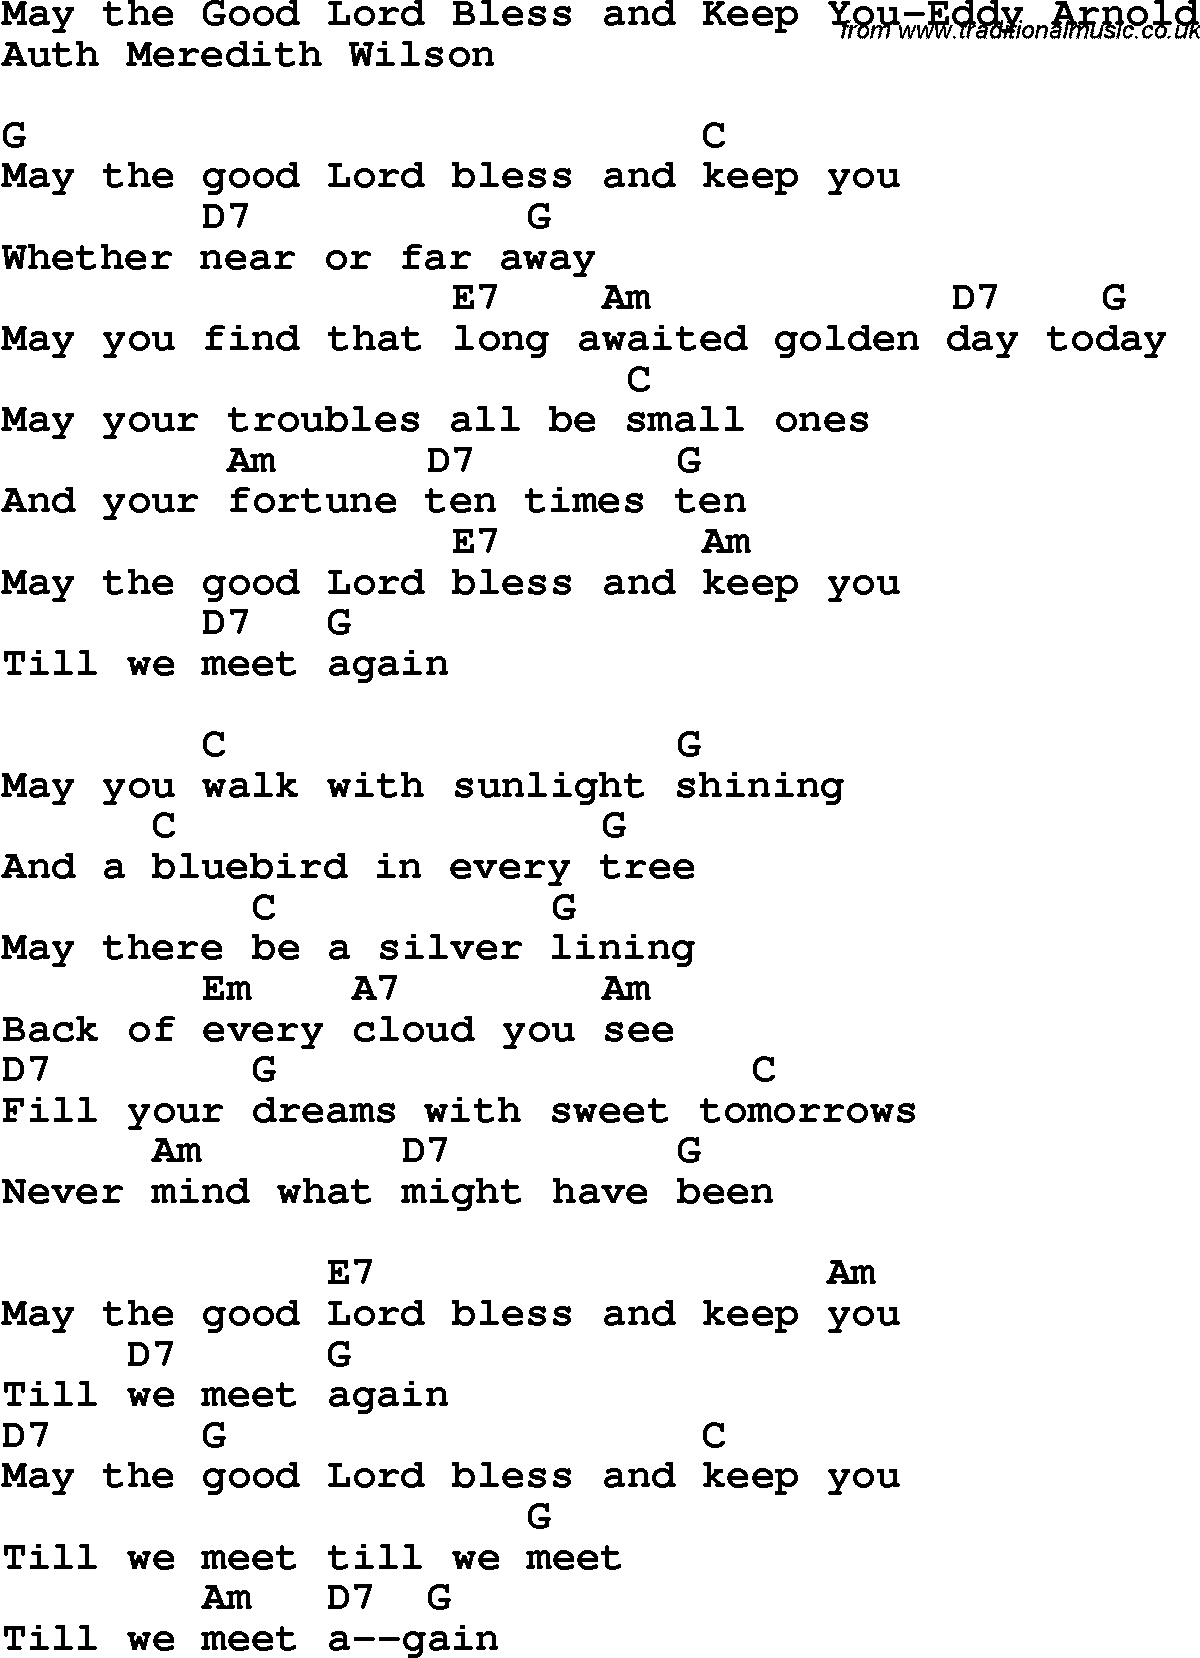 Country, Southern and Bluegrass Gospel Song May the Good Lord Bless and Keep You-Eddy Arnold lyrics and chords